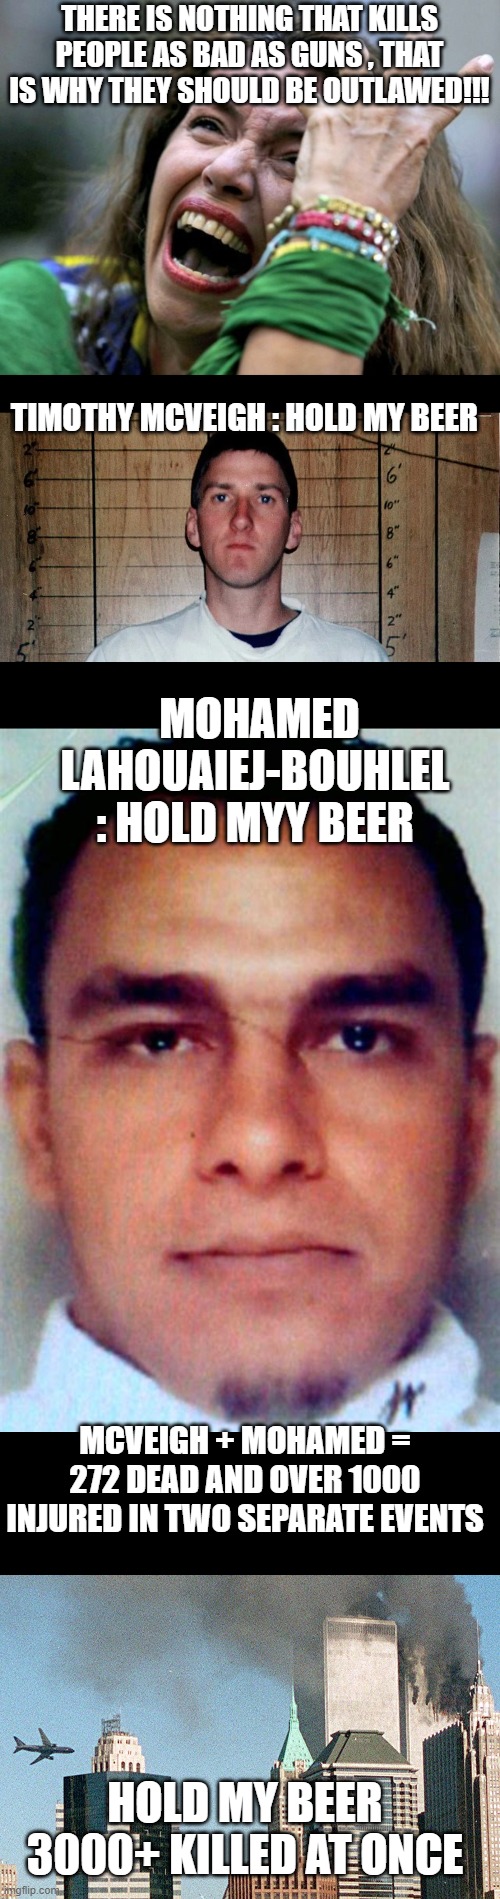 your reasons for out lawing guns has been over ruled due to the following facts |  THERE IS NOTHING THAT KILLS PEOPLE AS BAD AS GUNS , THAT IS WHY THEY SHOULD BE OUTLAWED!!! TIMOTHY MCVEIGH : HOLD MY BEER; MOHAMED LAHOUAIEJ-BOUHLEL : HOLD MYY BEER; MCVEIGH + MOHAMED = 272 DEAD AND OVER 1000 INJURED IN TWO SEPARATE EVENTS; HOLD MY BEER 3000+ KILLED AT ONCE | image tagged in facts,stupid liberals,guns,political meme,truth,funny memes | made w/ Imgflip meme maker